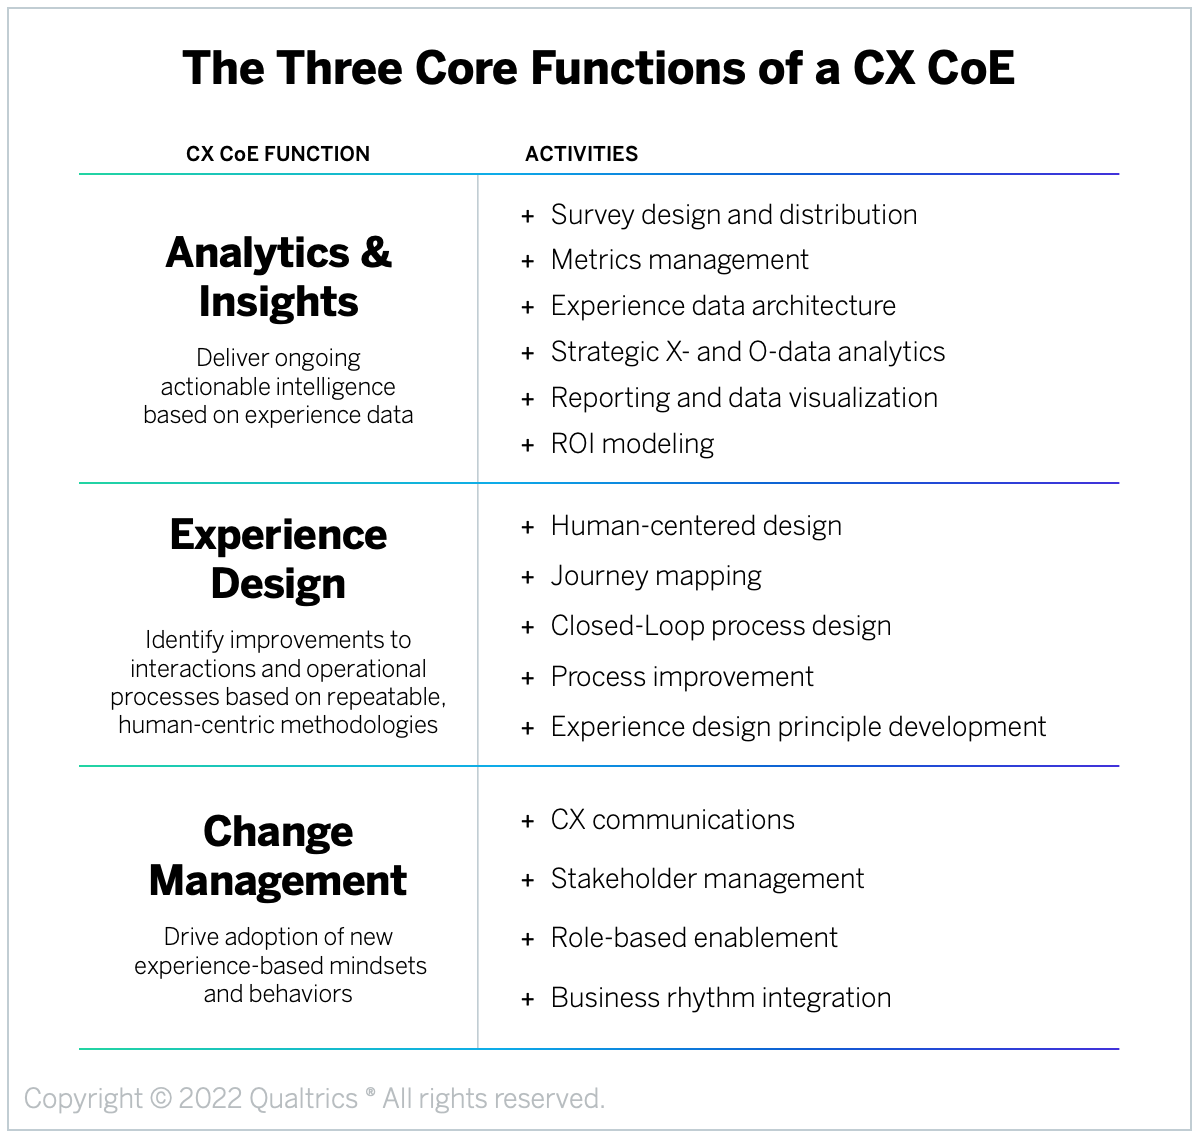 This image shows the three functional areas of a CX Center of Excellence (CoE) -- Analytics & Insights, Experience Design, and Change Management -- and common activities associated with each one.